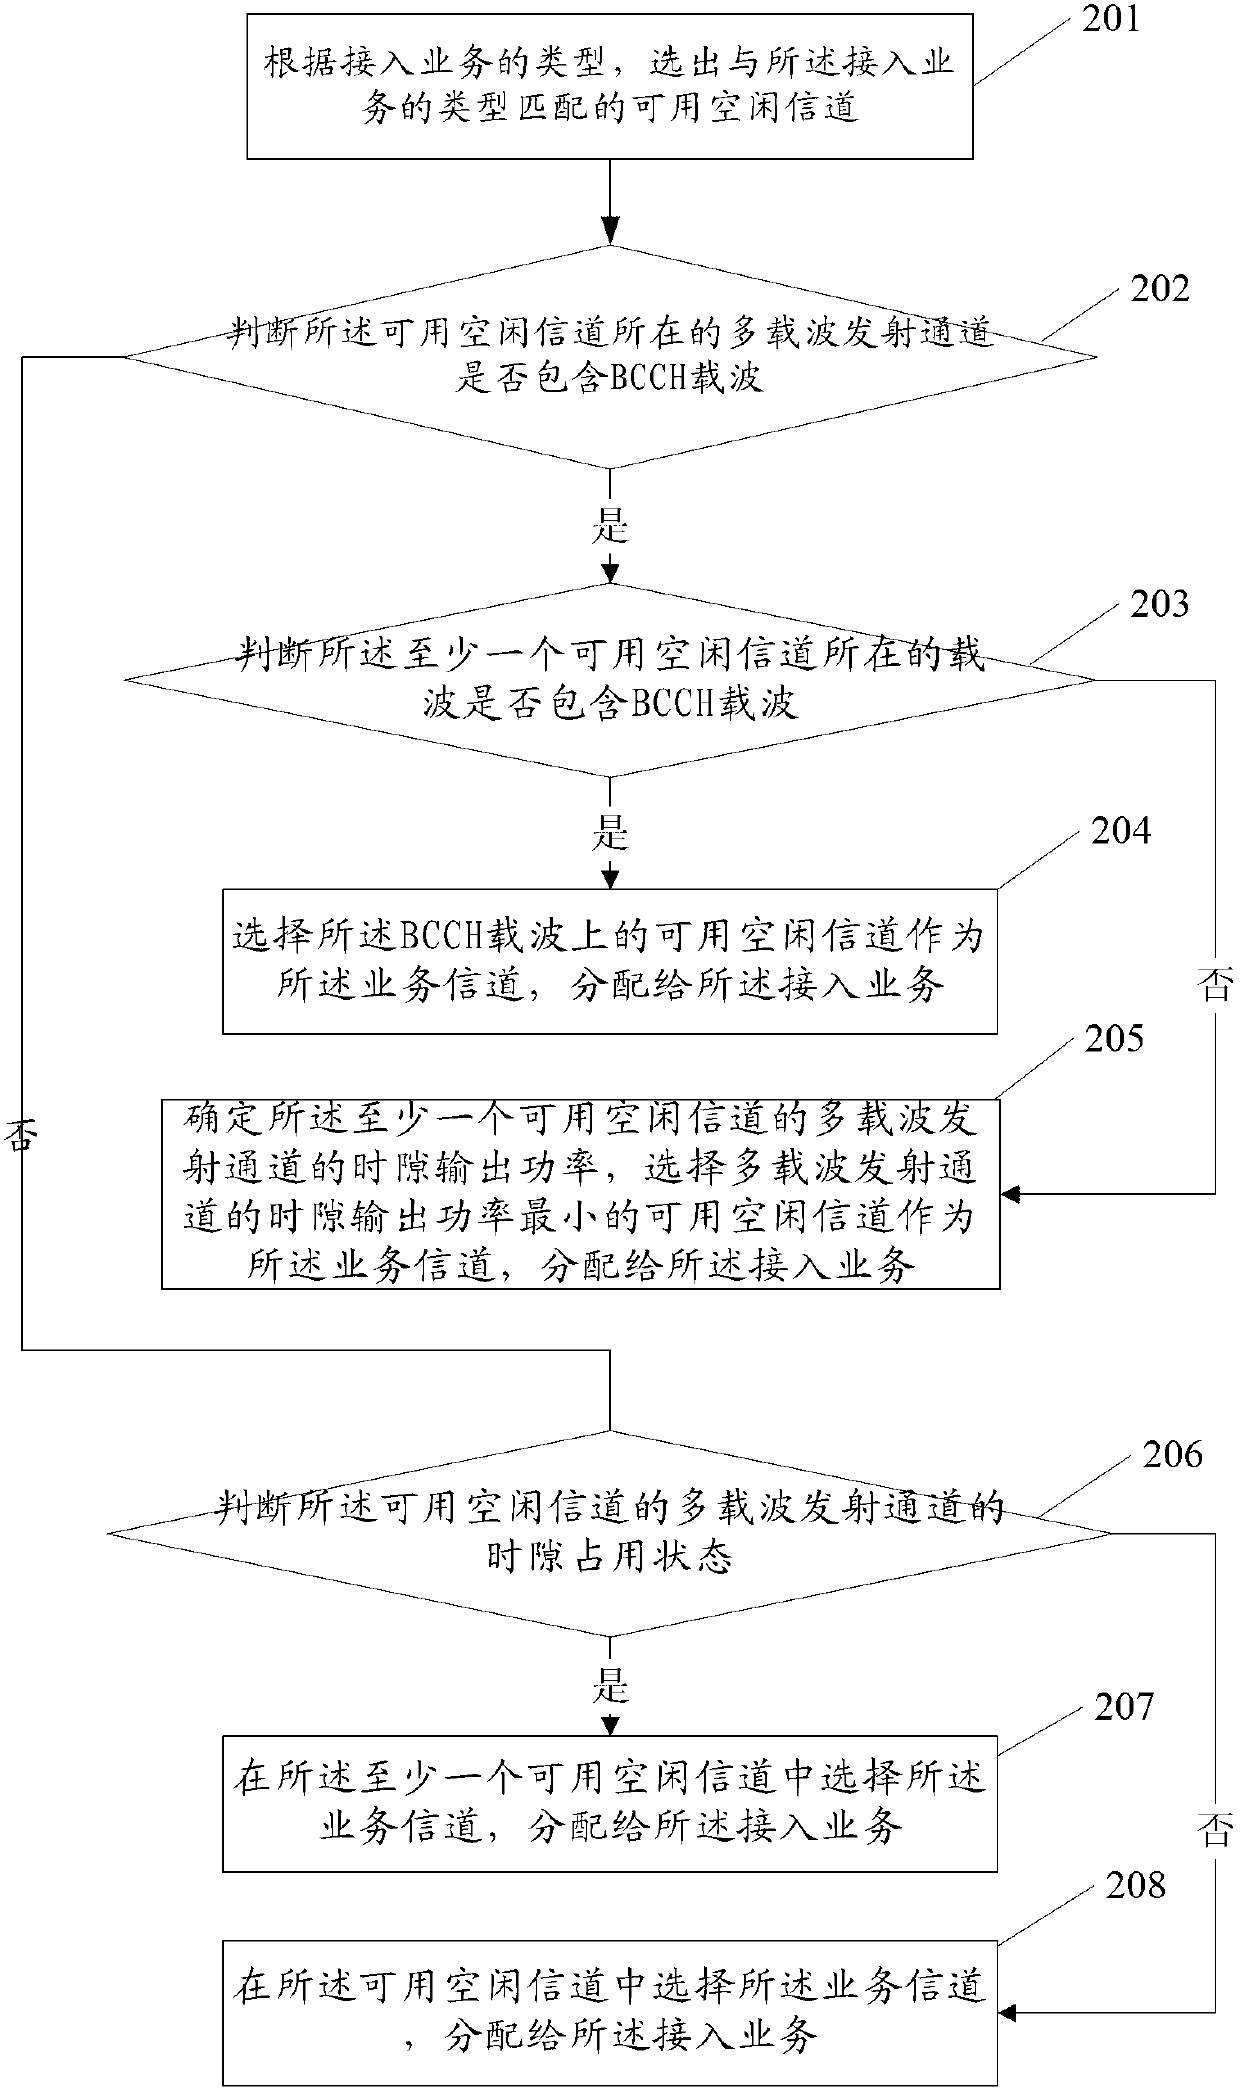 Method and apparatus for traffic channel assignment